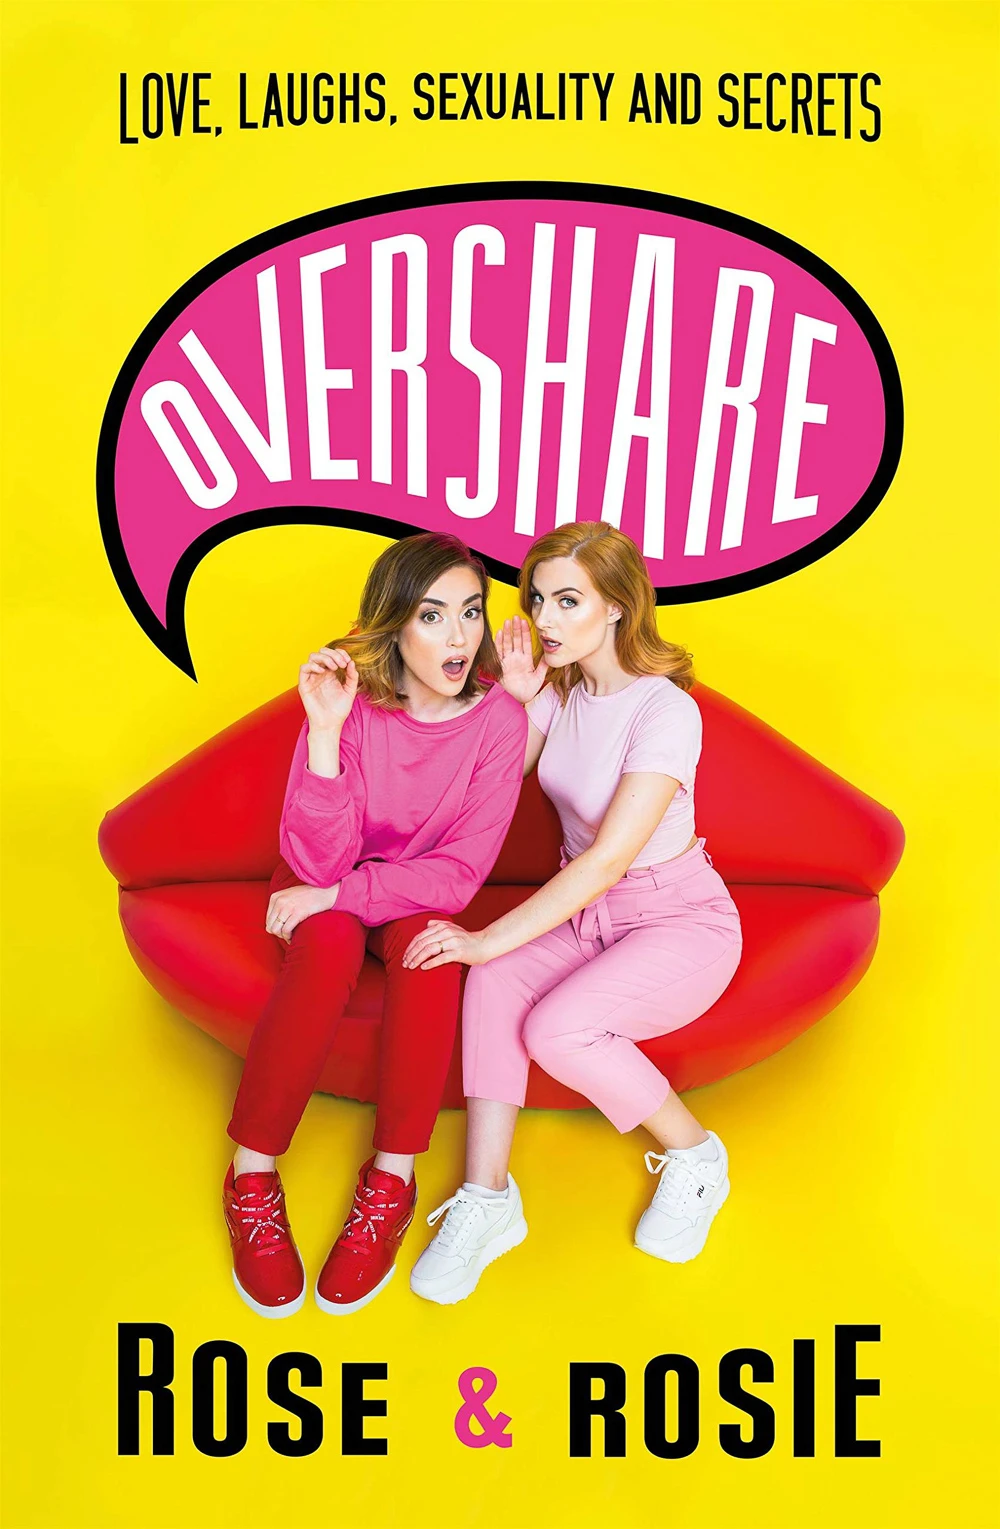 Overshare Love, Laughs, s exuality and Secrets by Rose Ellen Dix and Rosie Spaughton